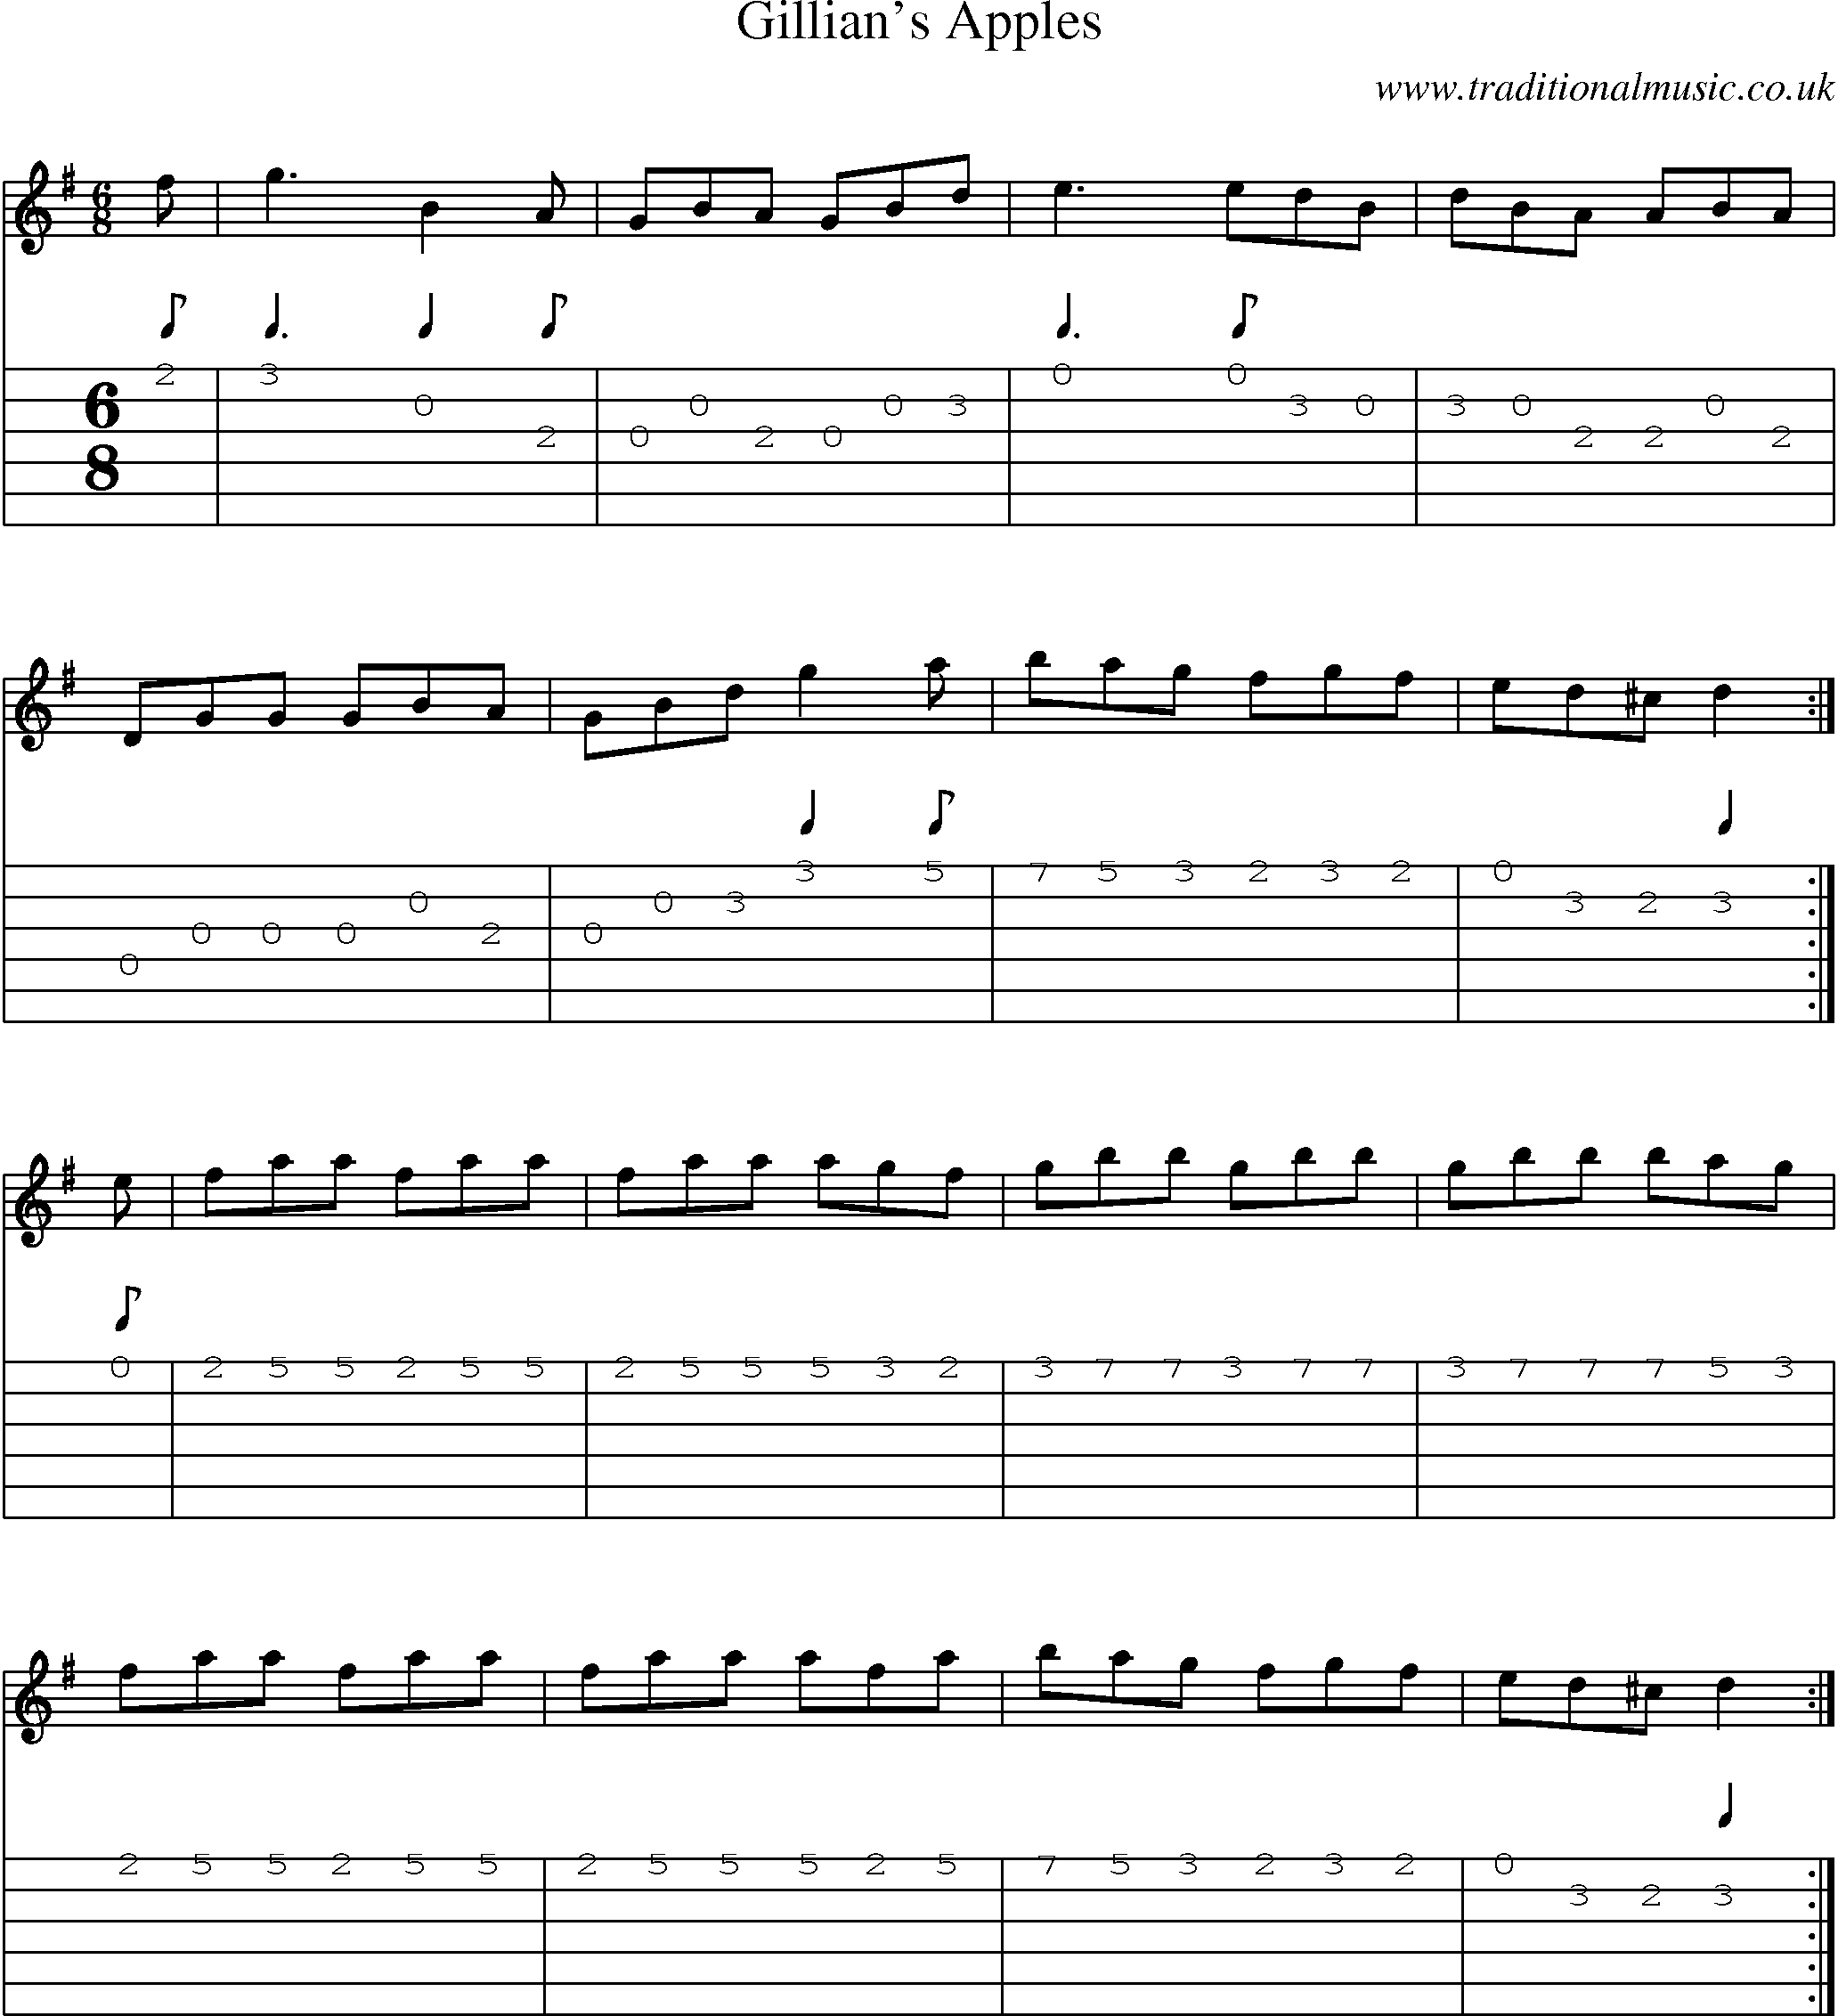 Music Score and Guitar Tabs for Gillians Apples